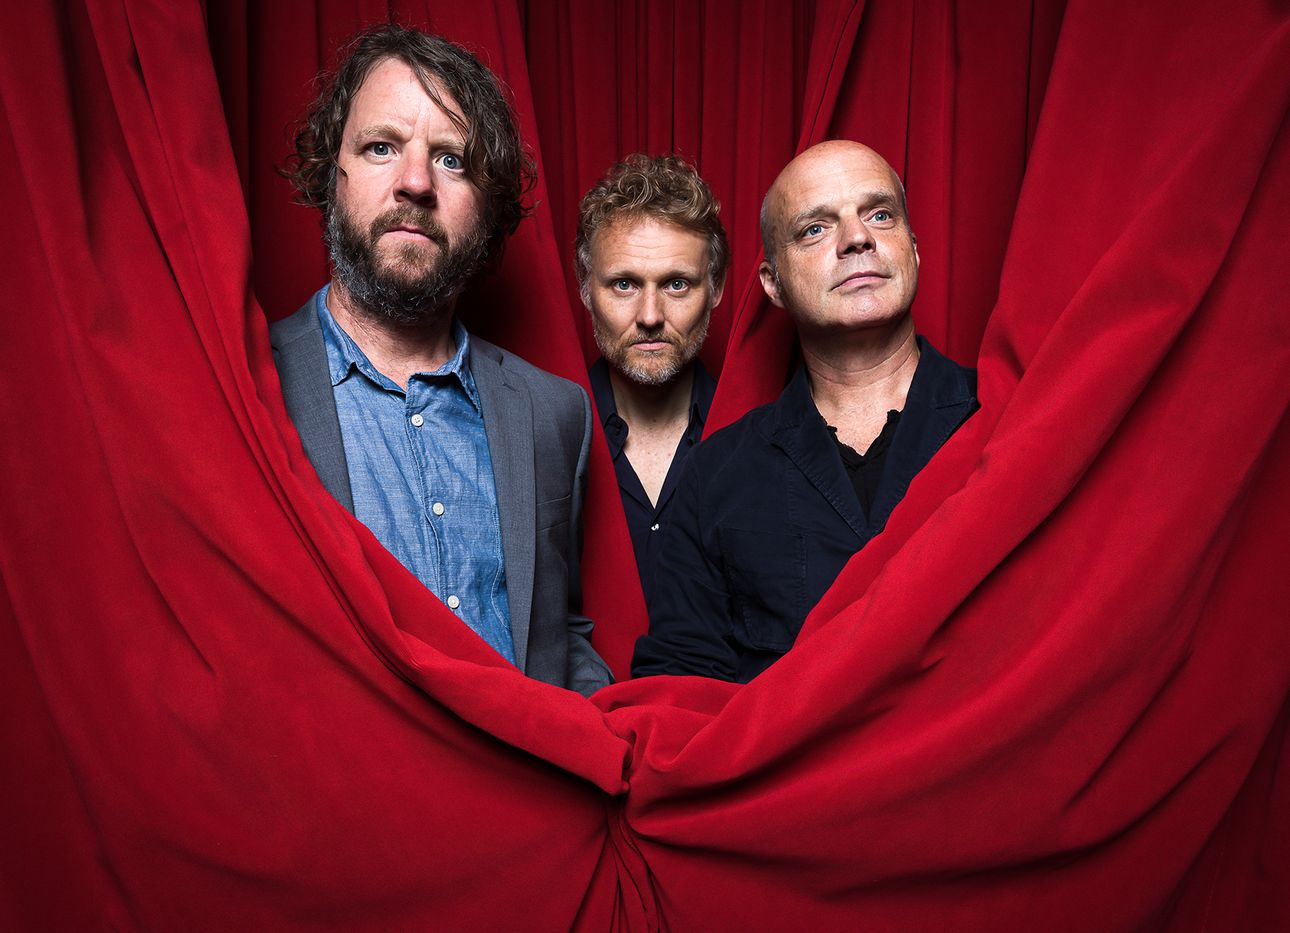 Martin, Wood, and Medeski in red theater curtains.